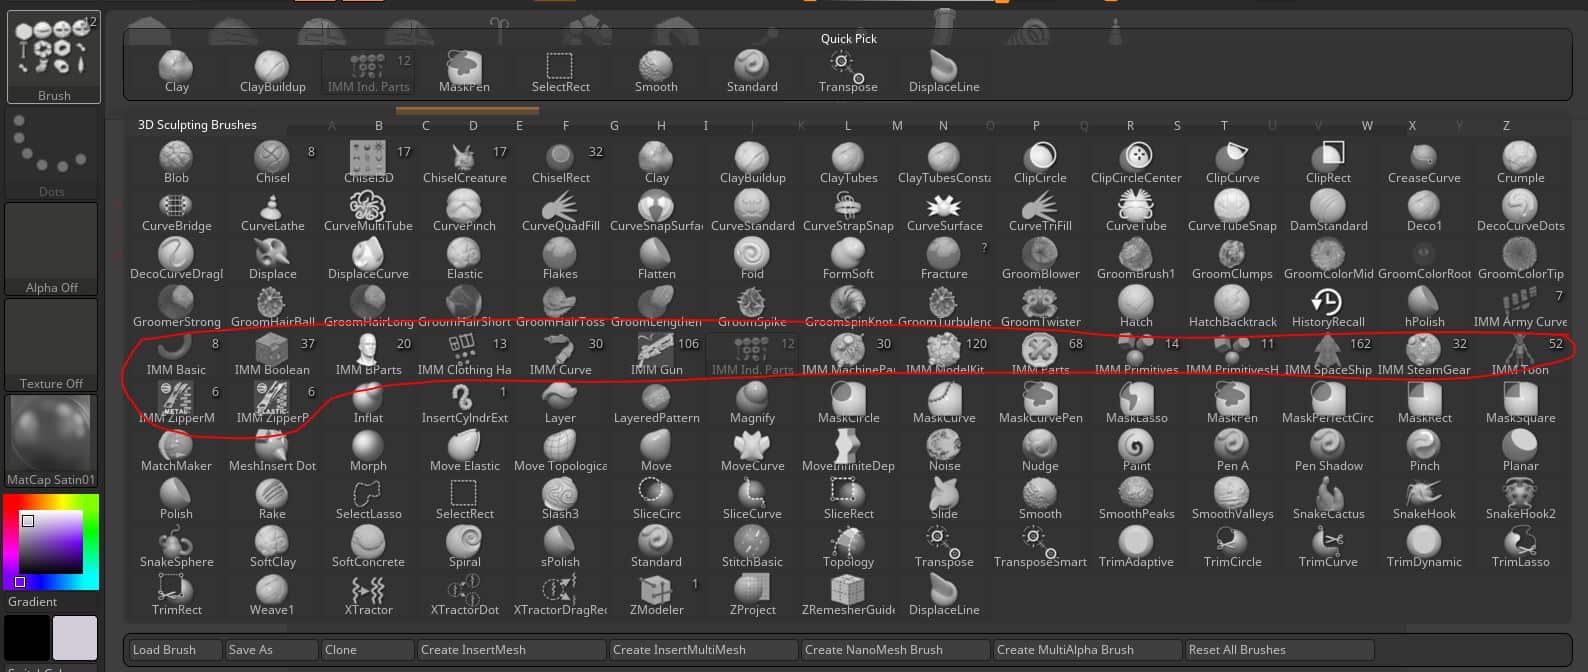 zbrush 4r8 enable all the subtool at same time